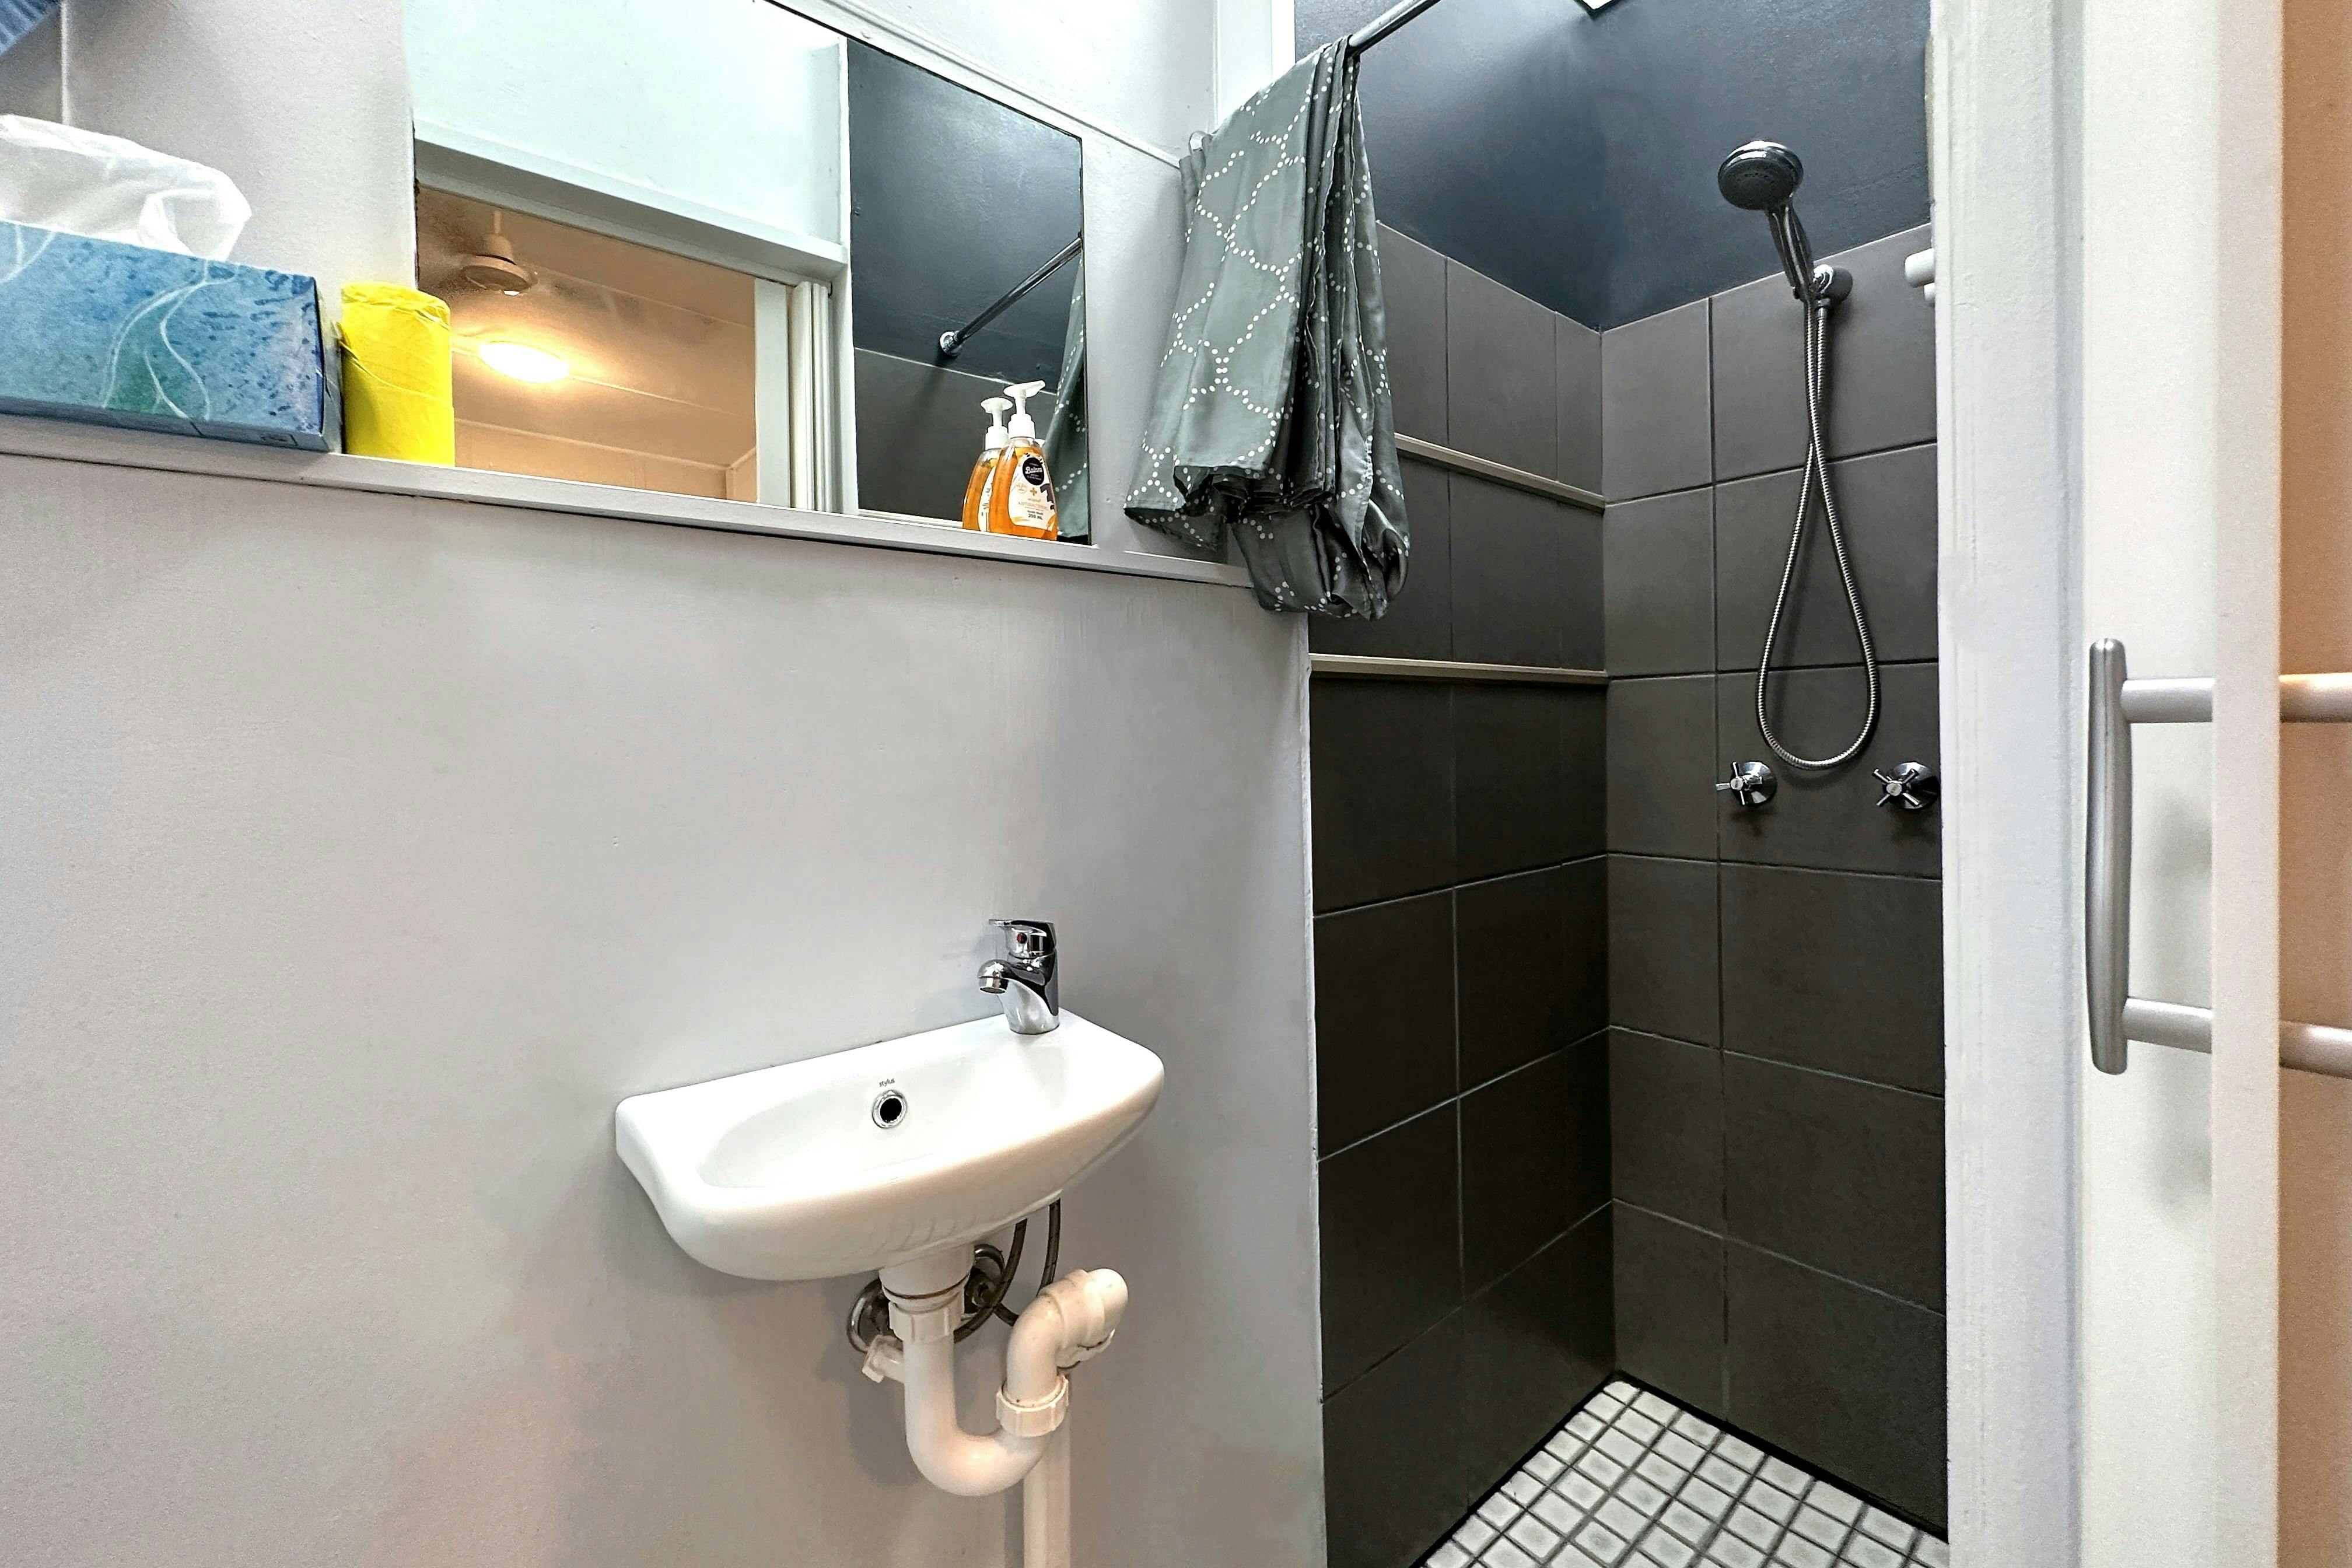 Self-Contained Unit at Golden Sands Retreat, Wagait Beach, NT, Ensuite